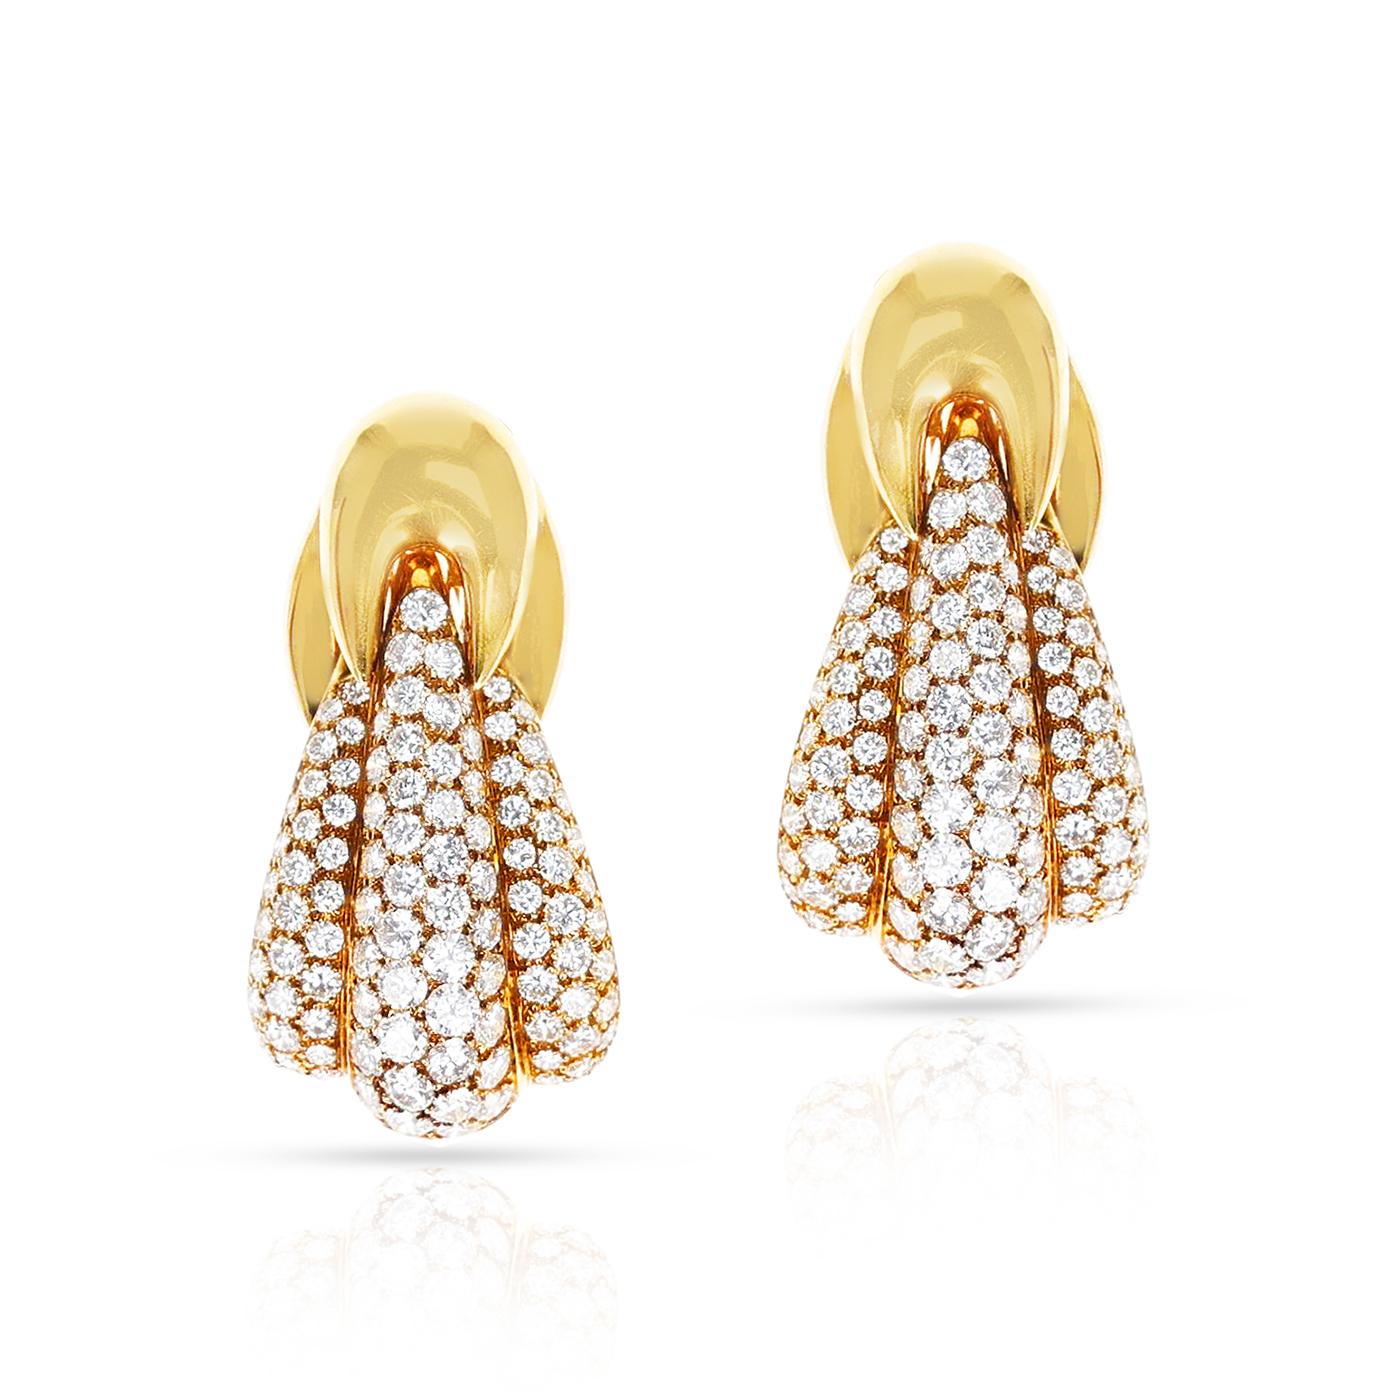 A magnificent pair of Van Cleef & Arpels Large Cocktail Diamond Earrings made in 18 karat Yellow Gold. Length 1.60 inches. The total weight is 28.79 grams. Signed and numbered.